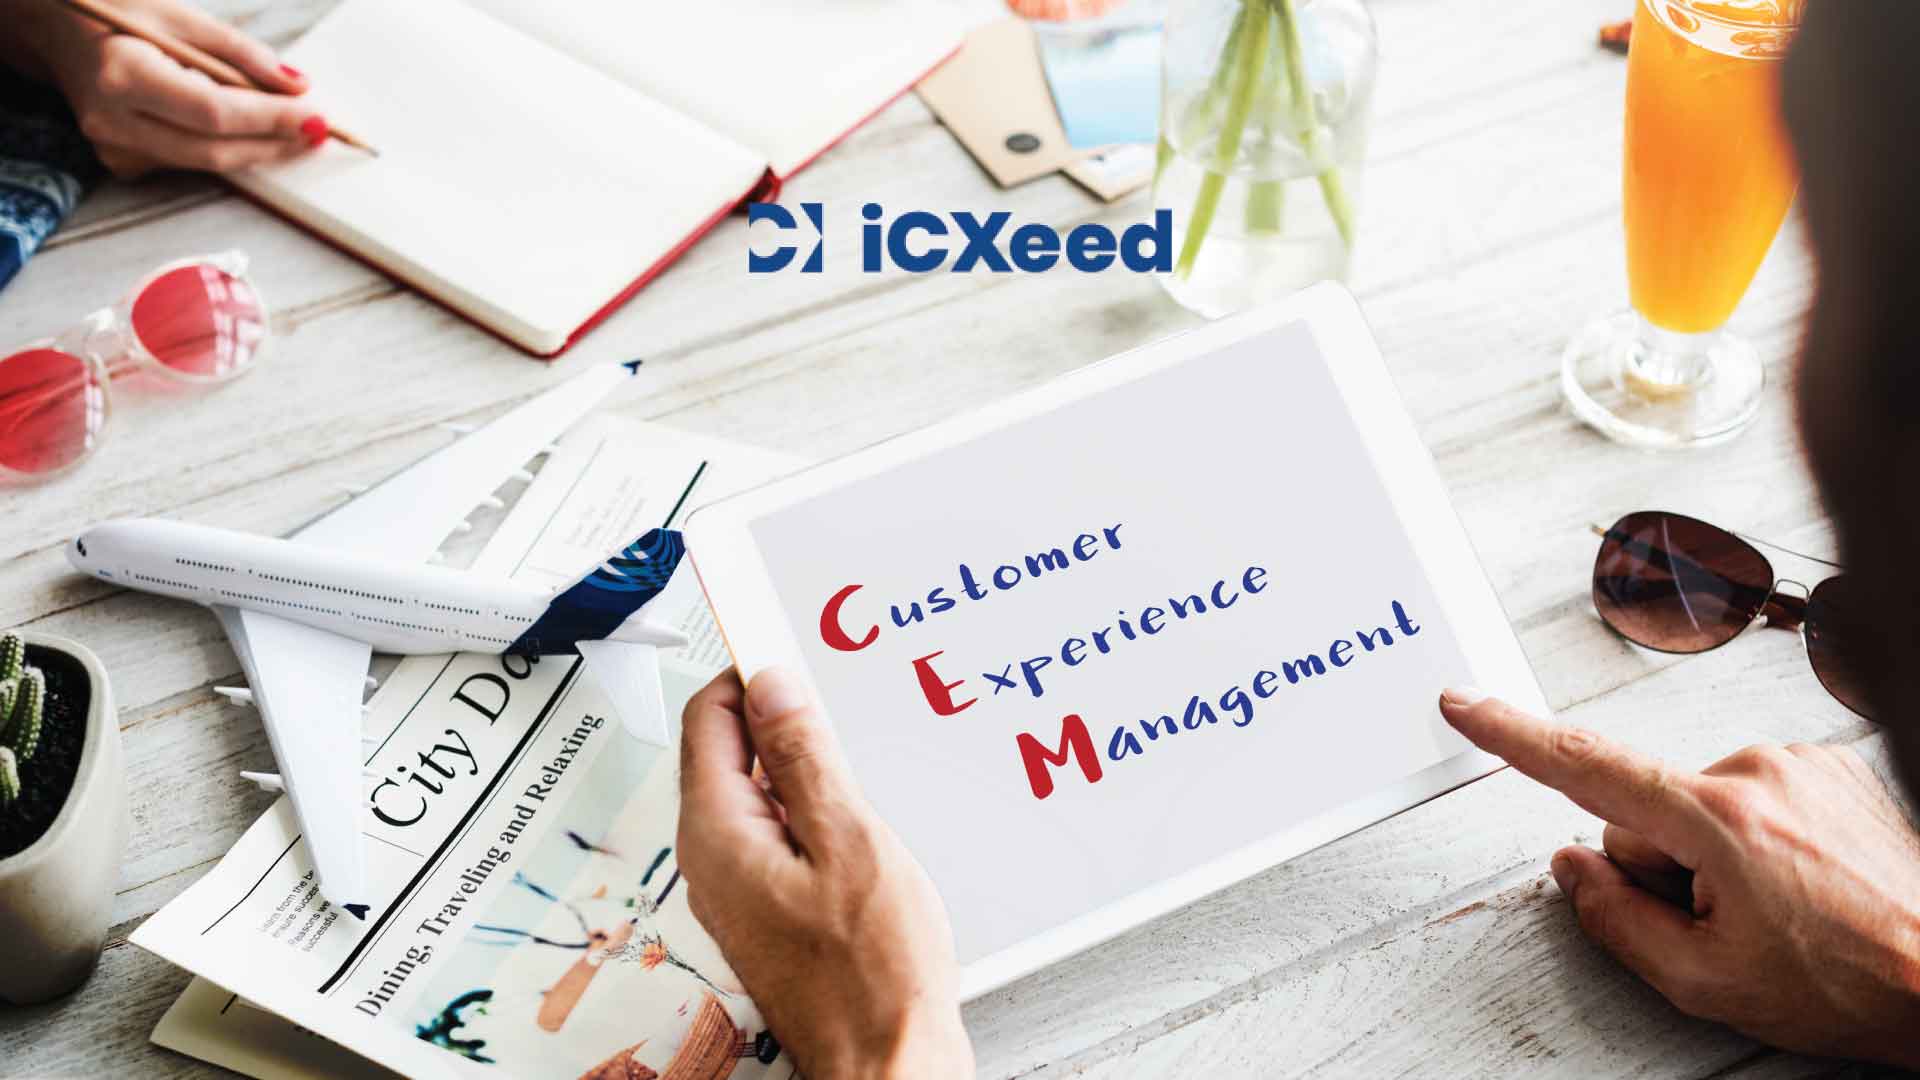 iCXeed Ushers in the Future Era of Customer Experience Management With Business Process Innovation